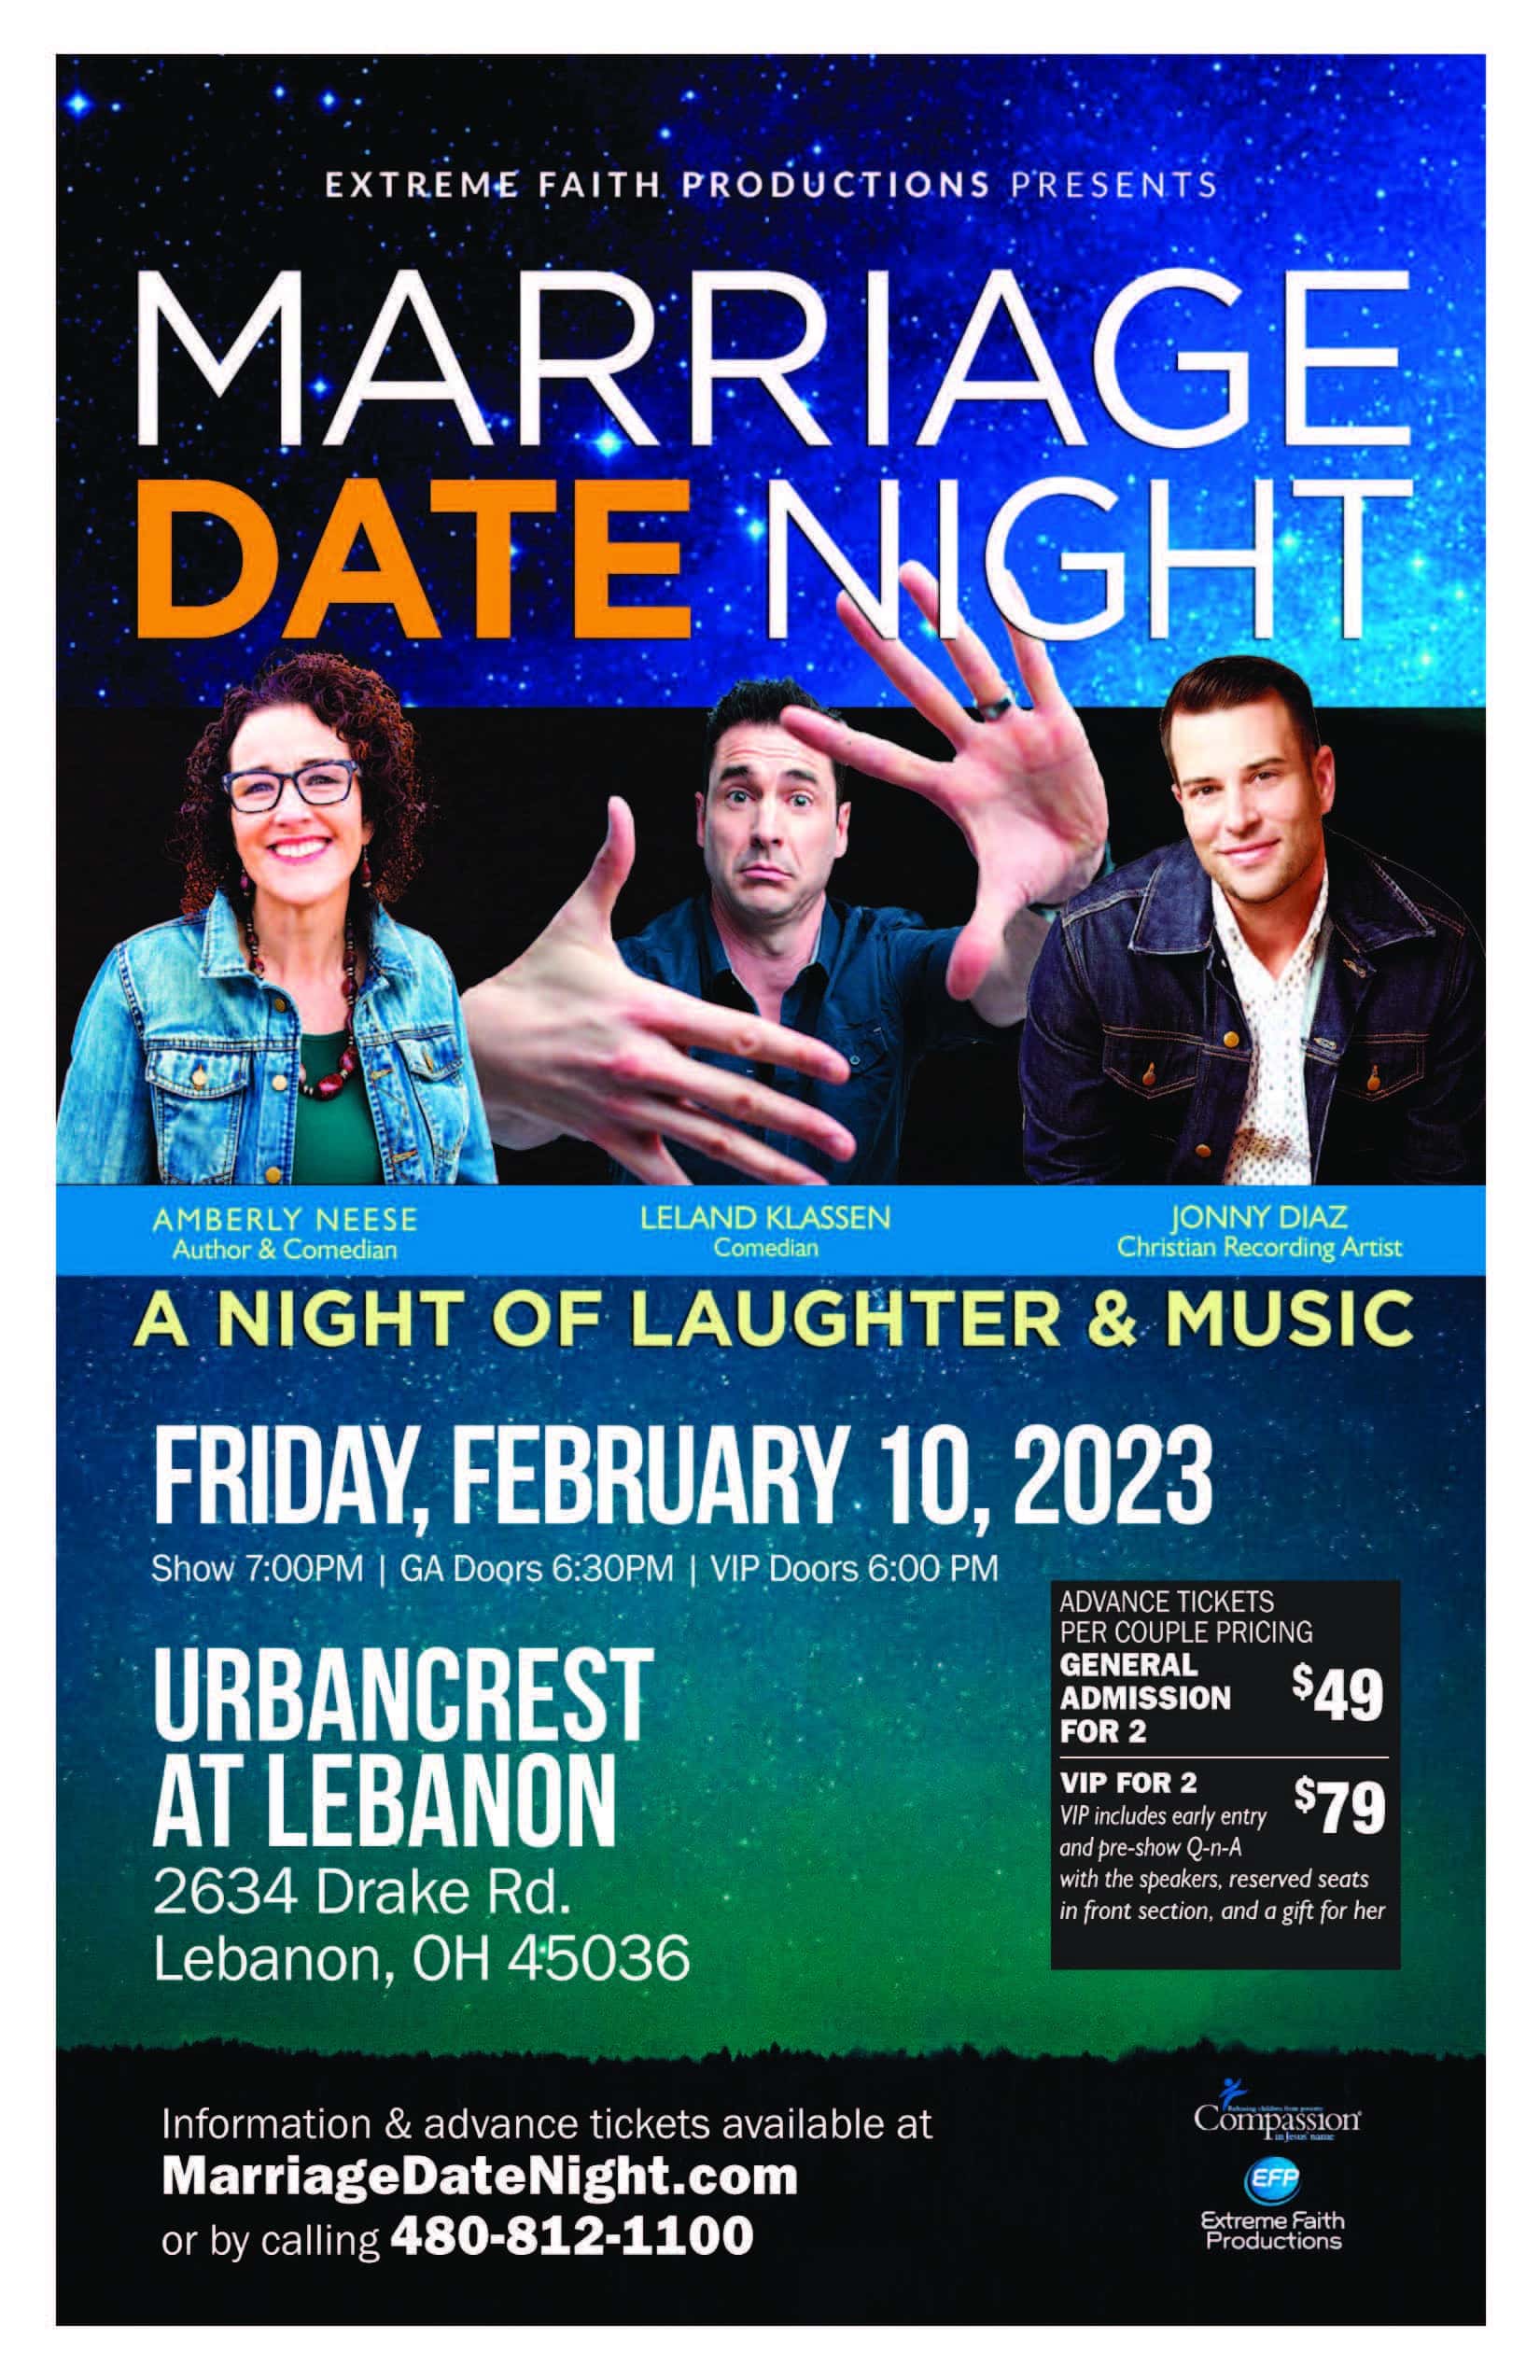 Marriage Date night flyer for February 10, 2023